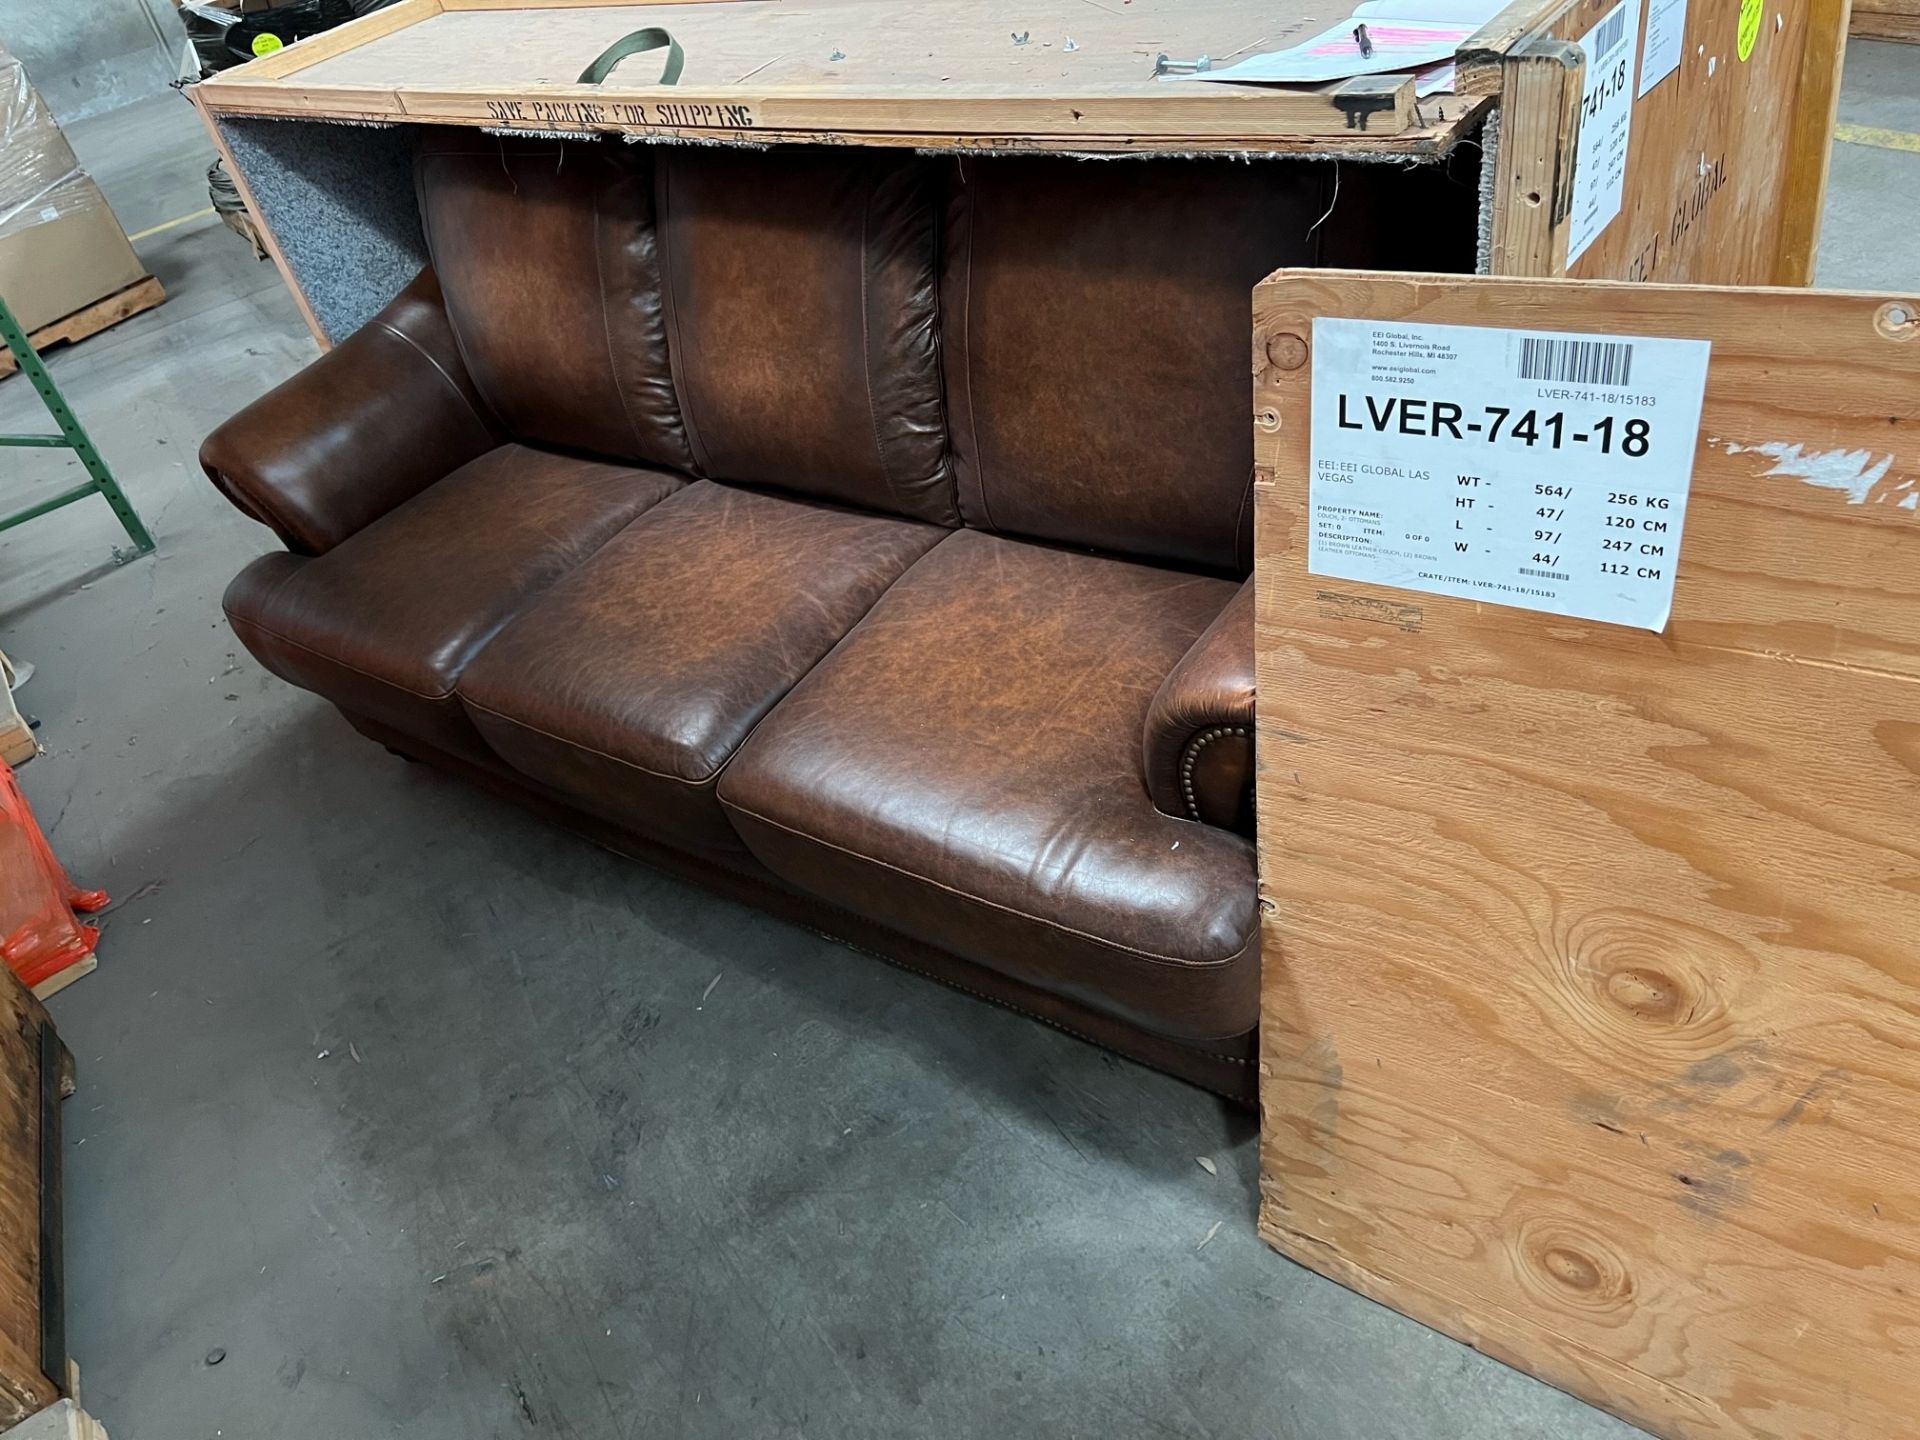 LVER-741-18 (1) Brown leather sofa